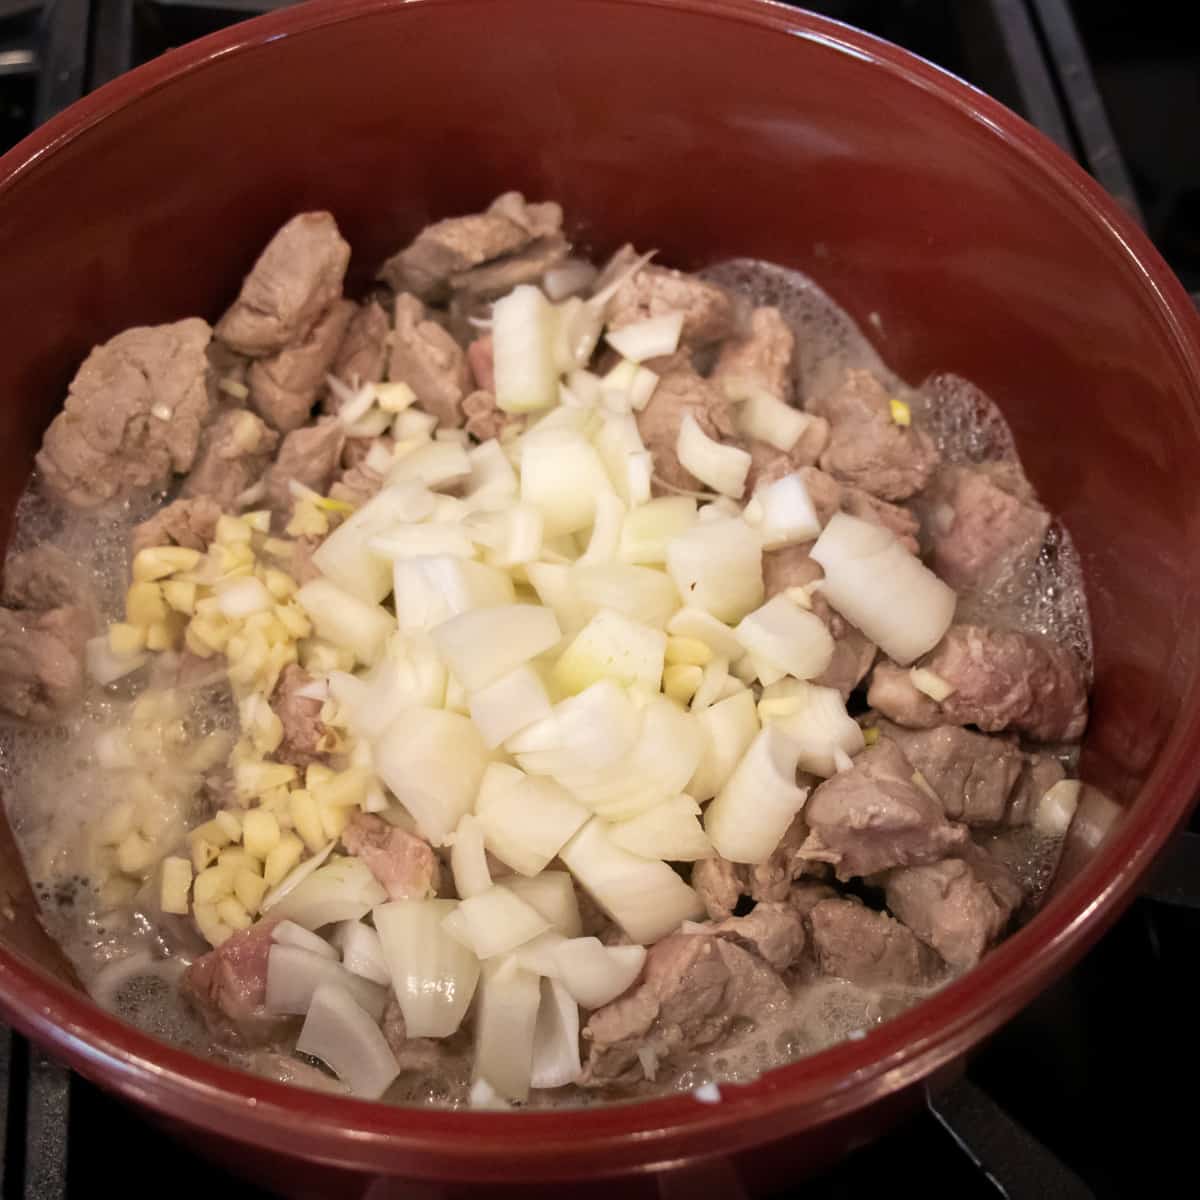 A red pot with pork, garlic and onion cooking.